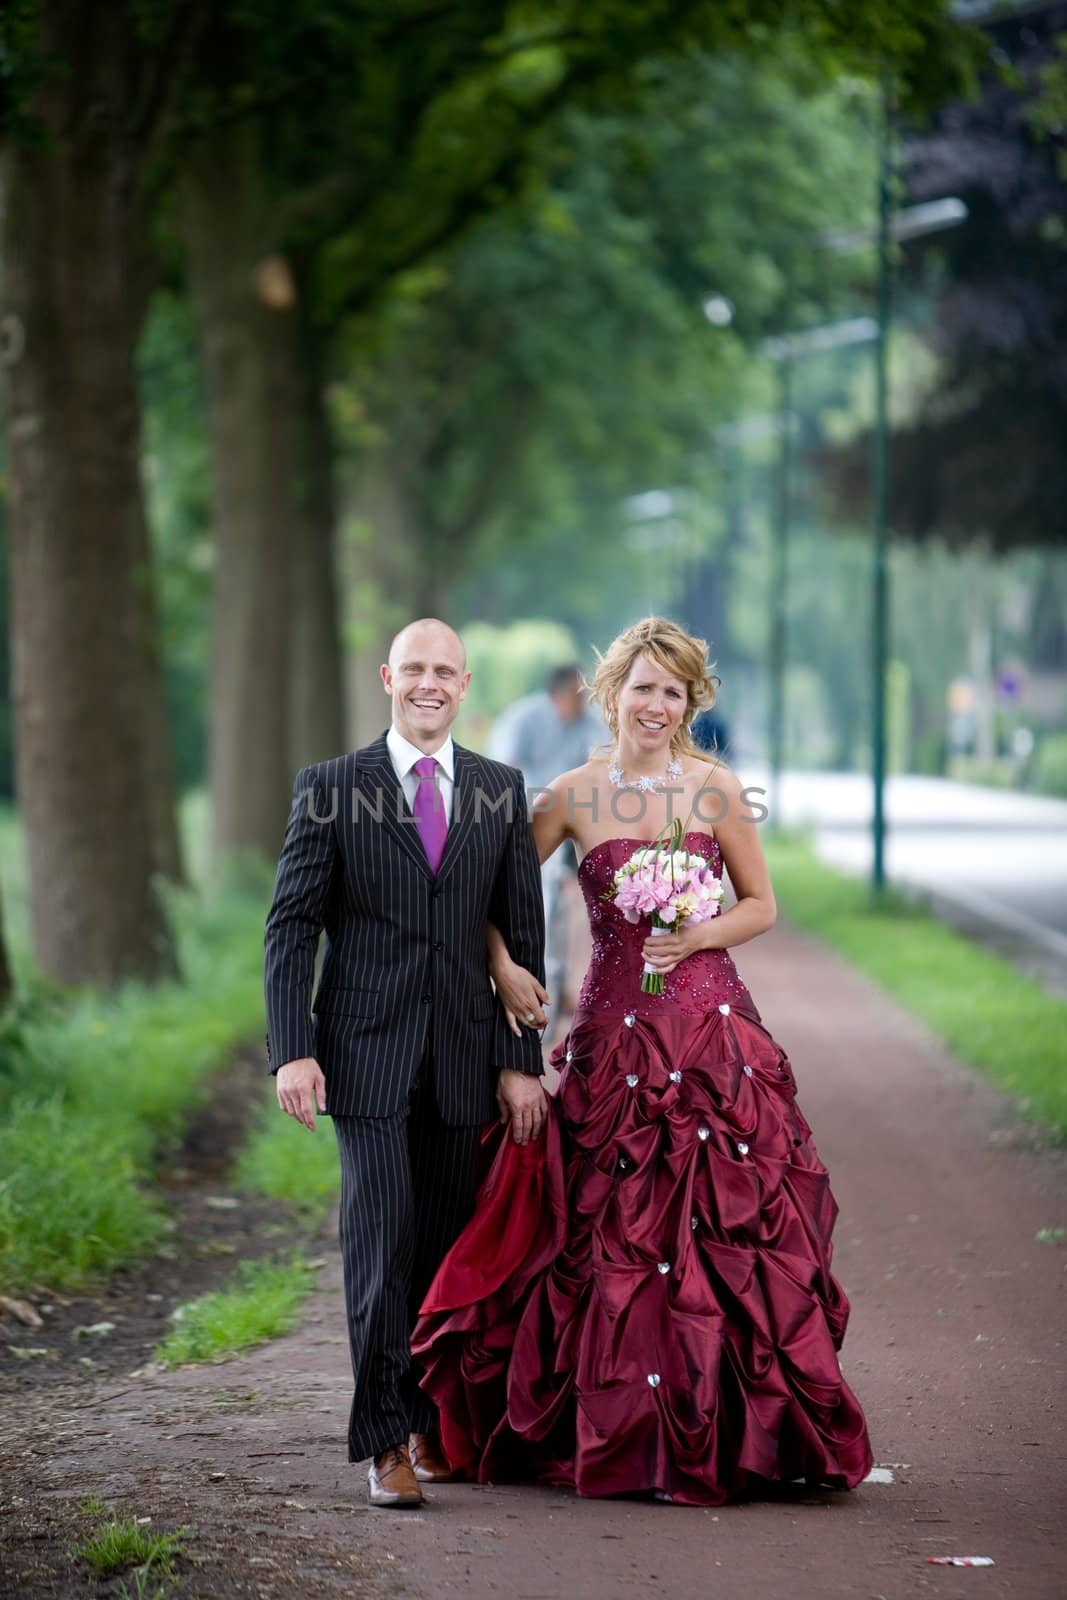 Beautiful bride and groom walking along a bicycle path